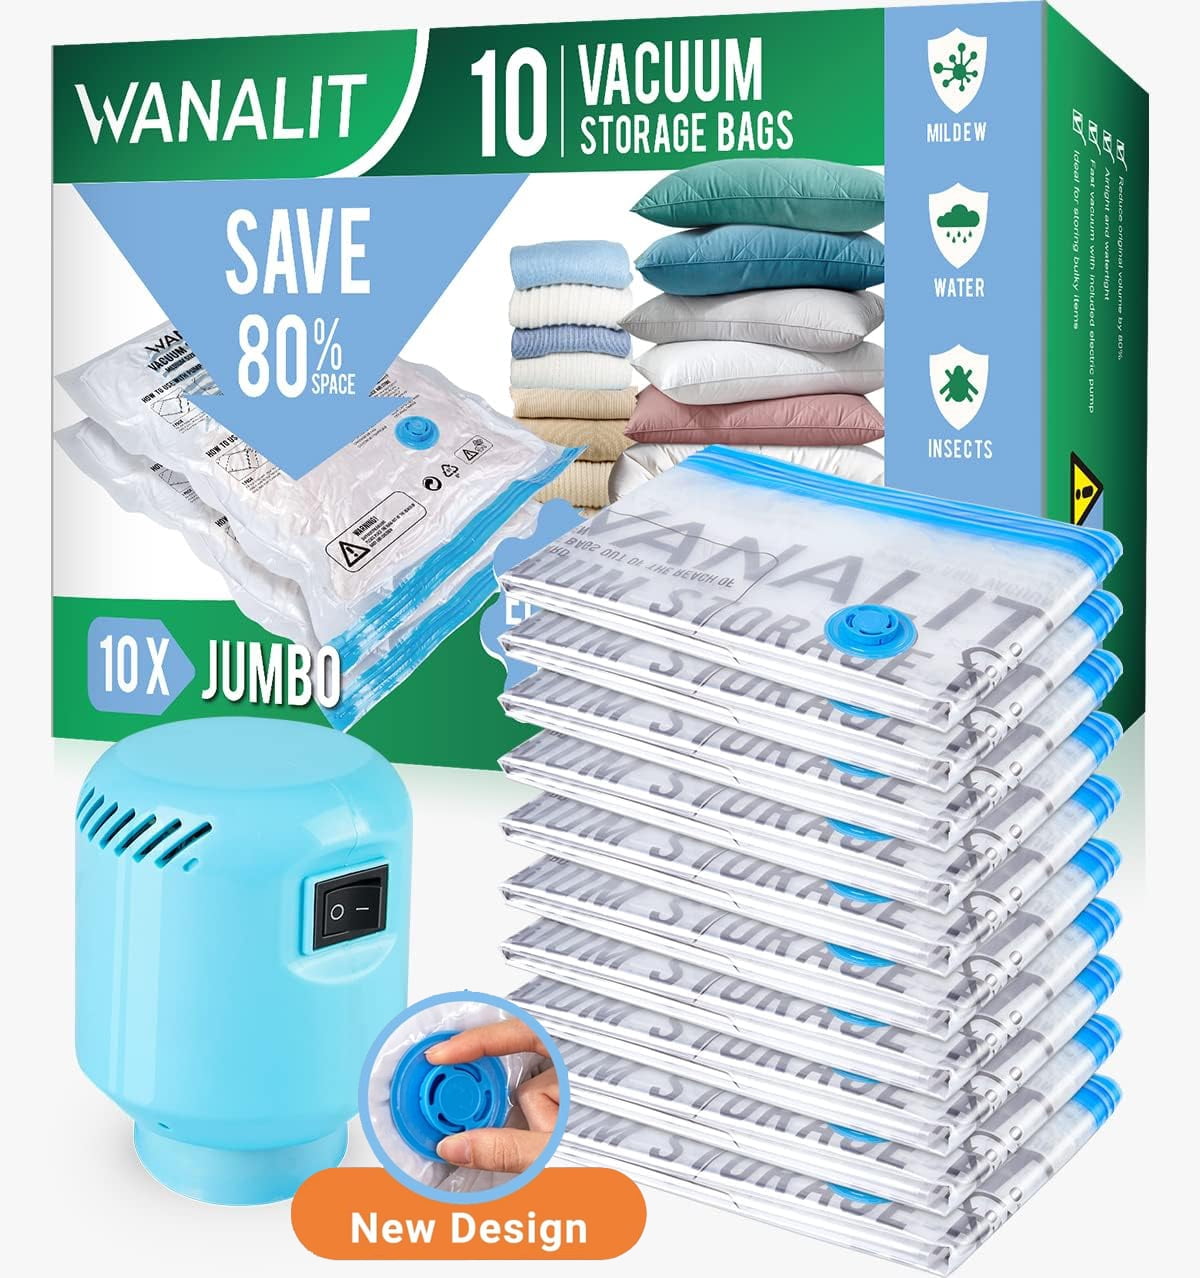  20 Vacuum Storage Bags with Electric Pump, Vacuum Sealed  Storage Bags (3Jumbo/3Large/7Medium/7Small), Space Saver Vacuum Seal Bags  for Clothing, Comforters, Pillows, Towel, Blanket Storage, Bedding : Home &  Kitchen